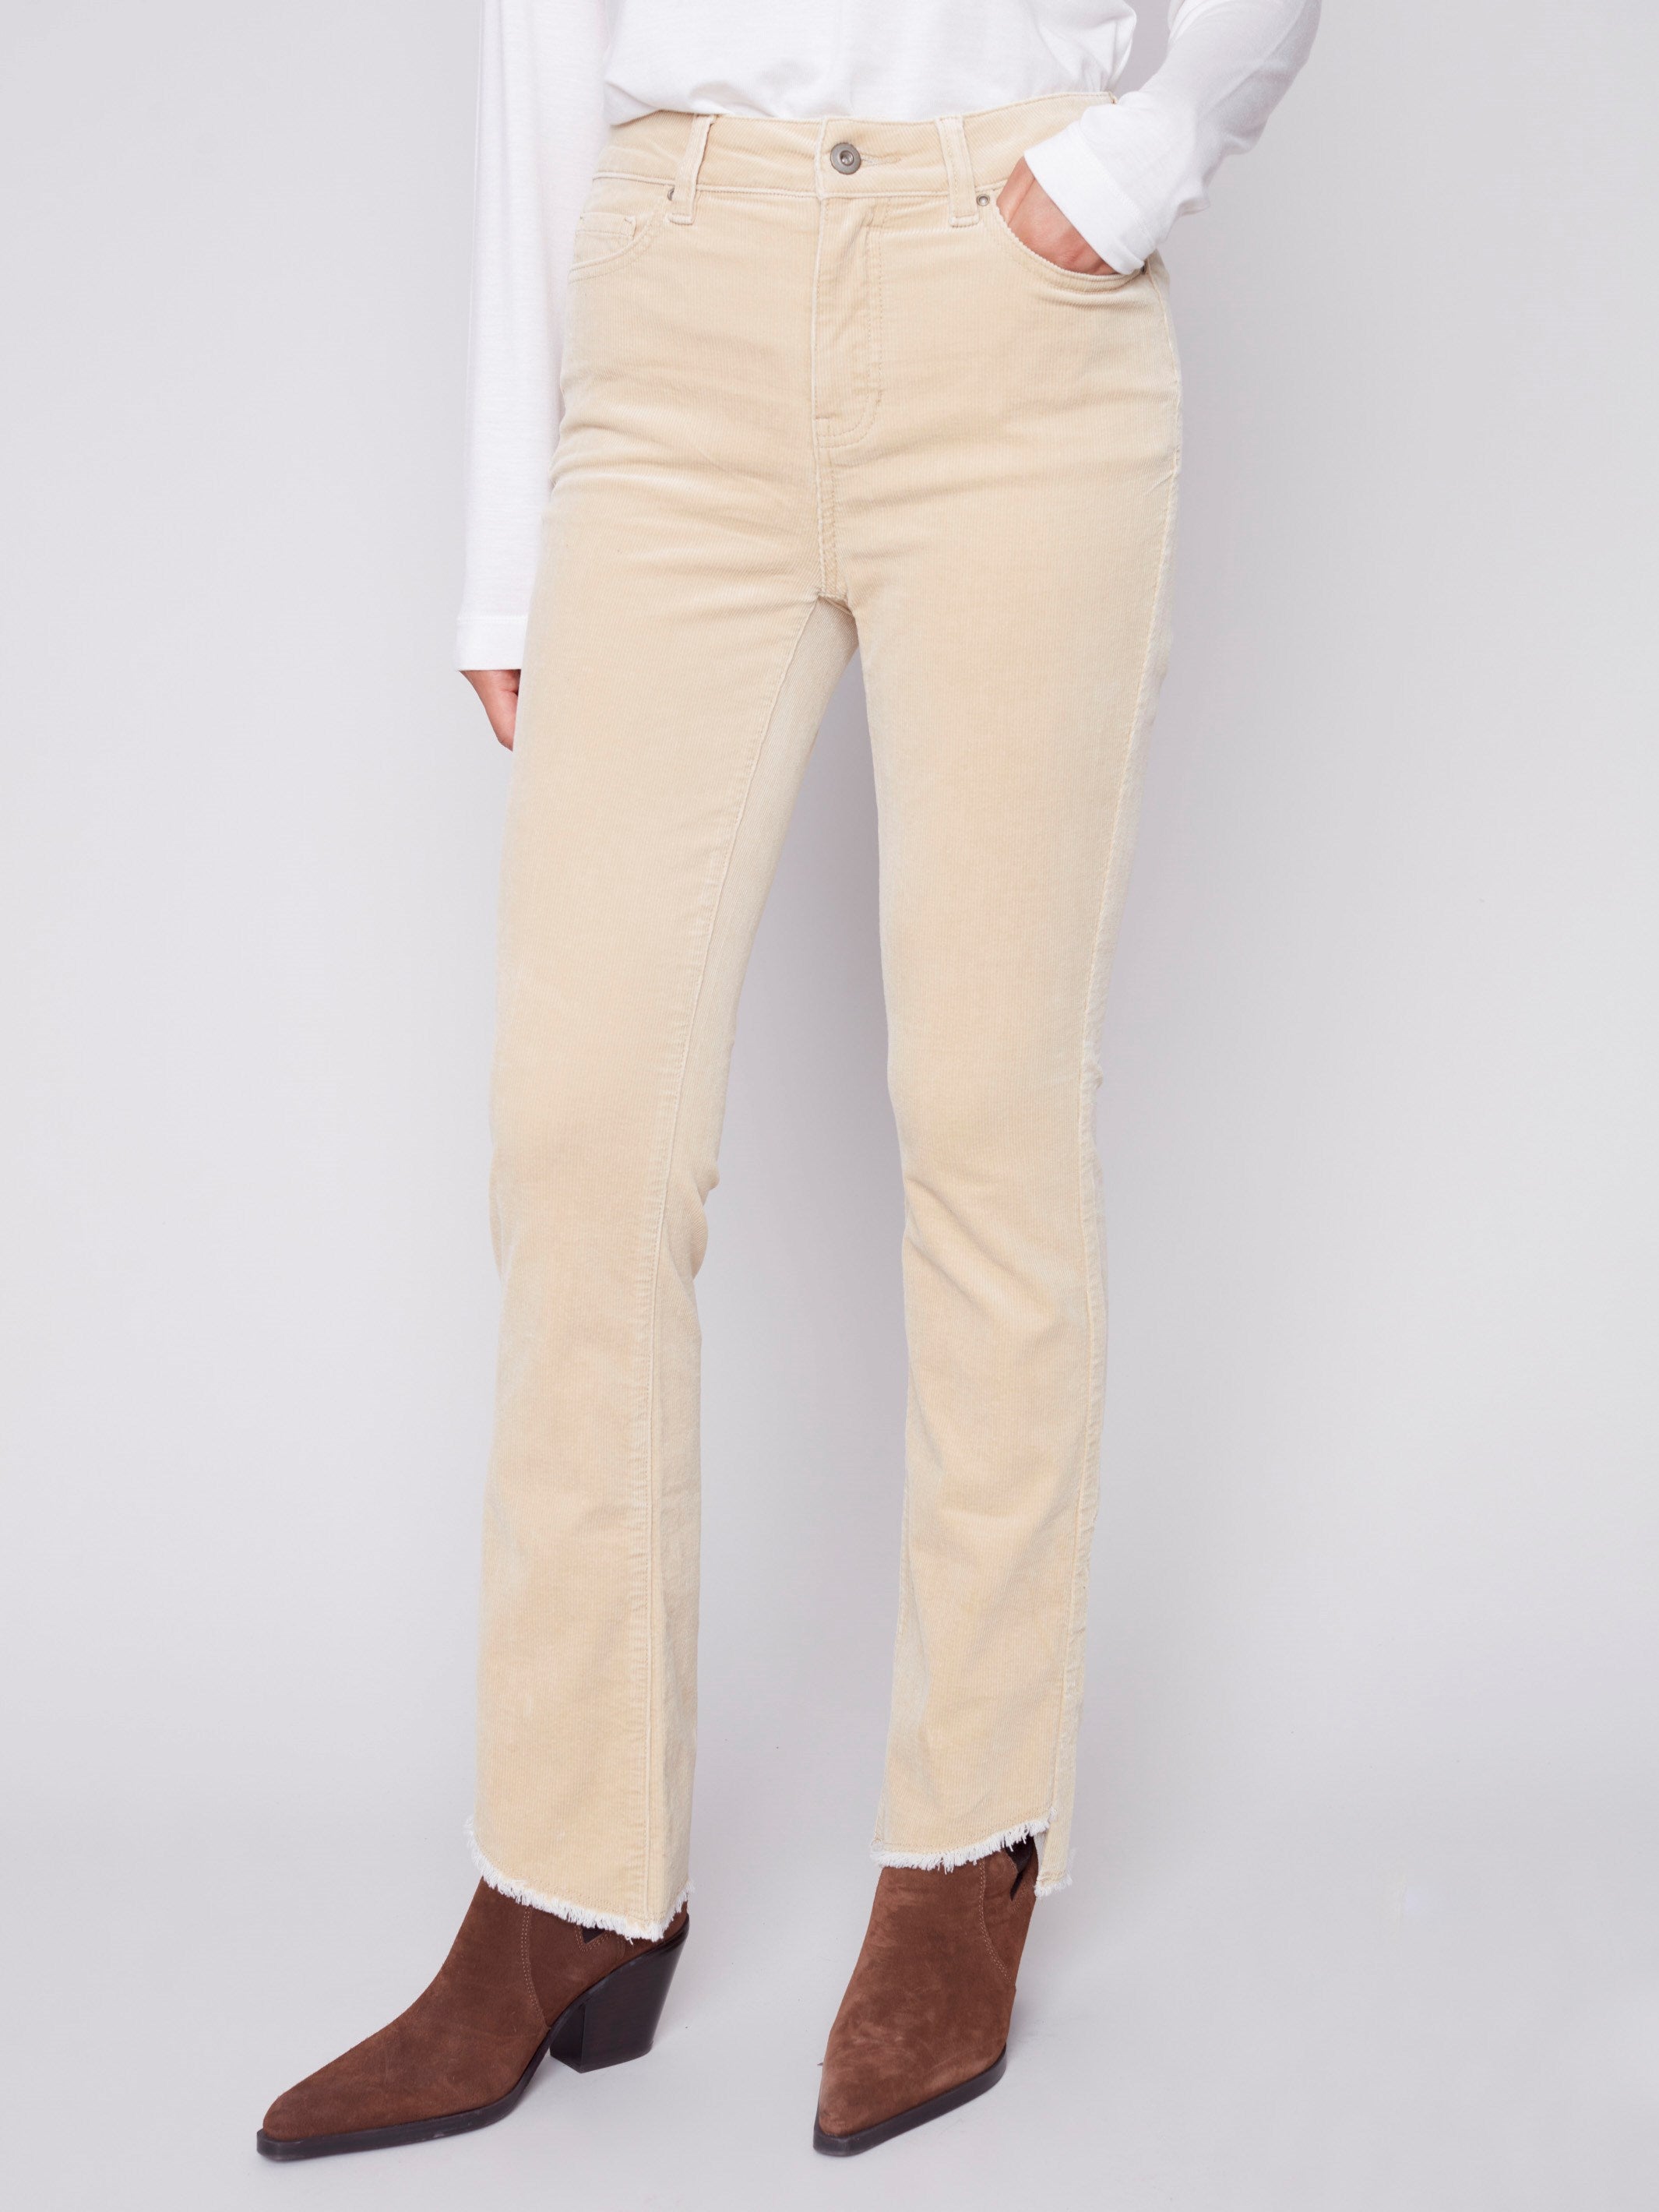 Bootcut Corduroy Pants with Asymmetrical Fringed Hem - Natural